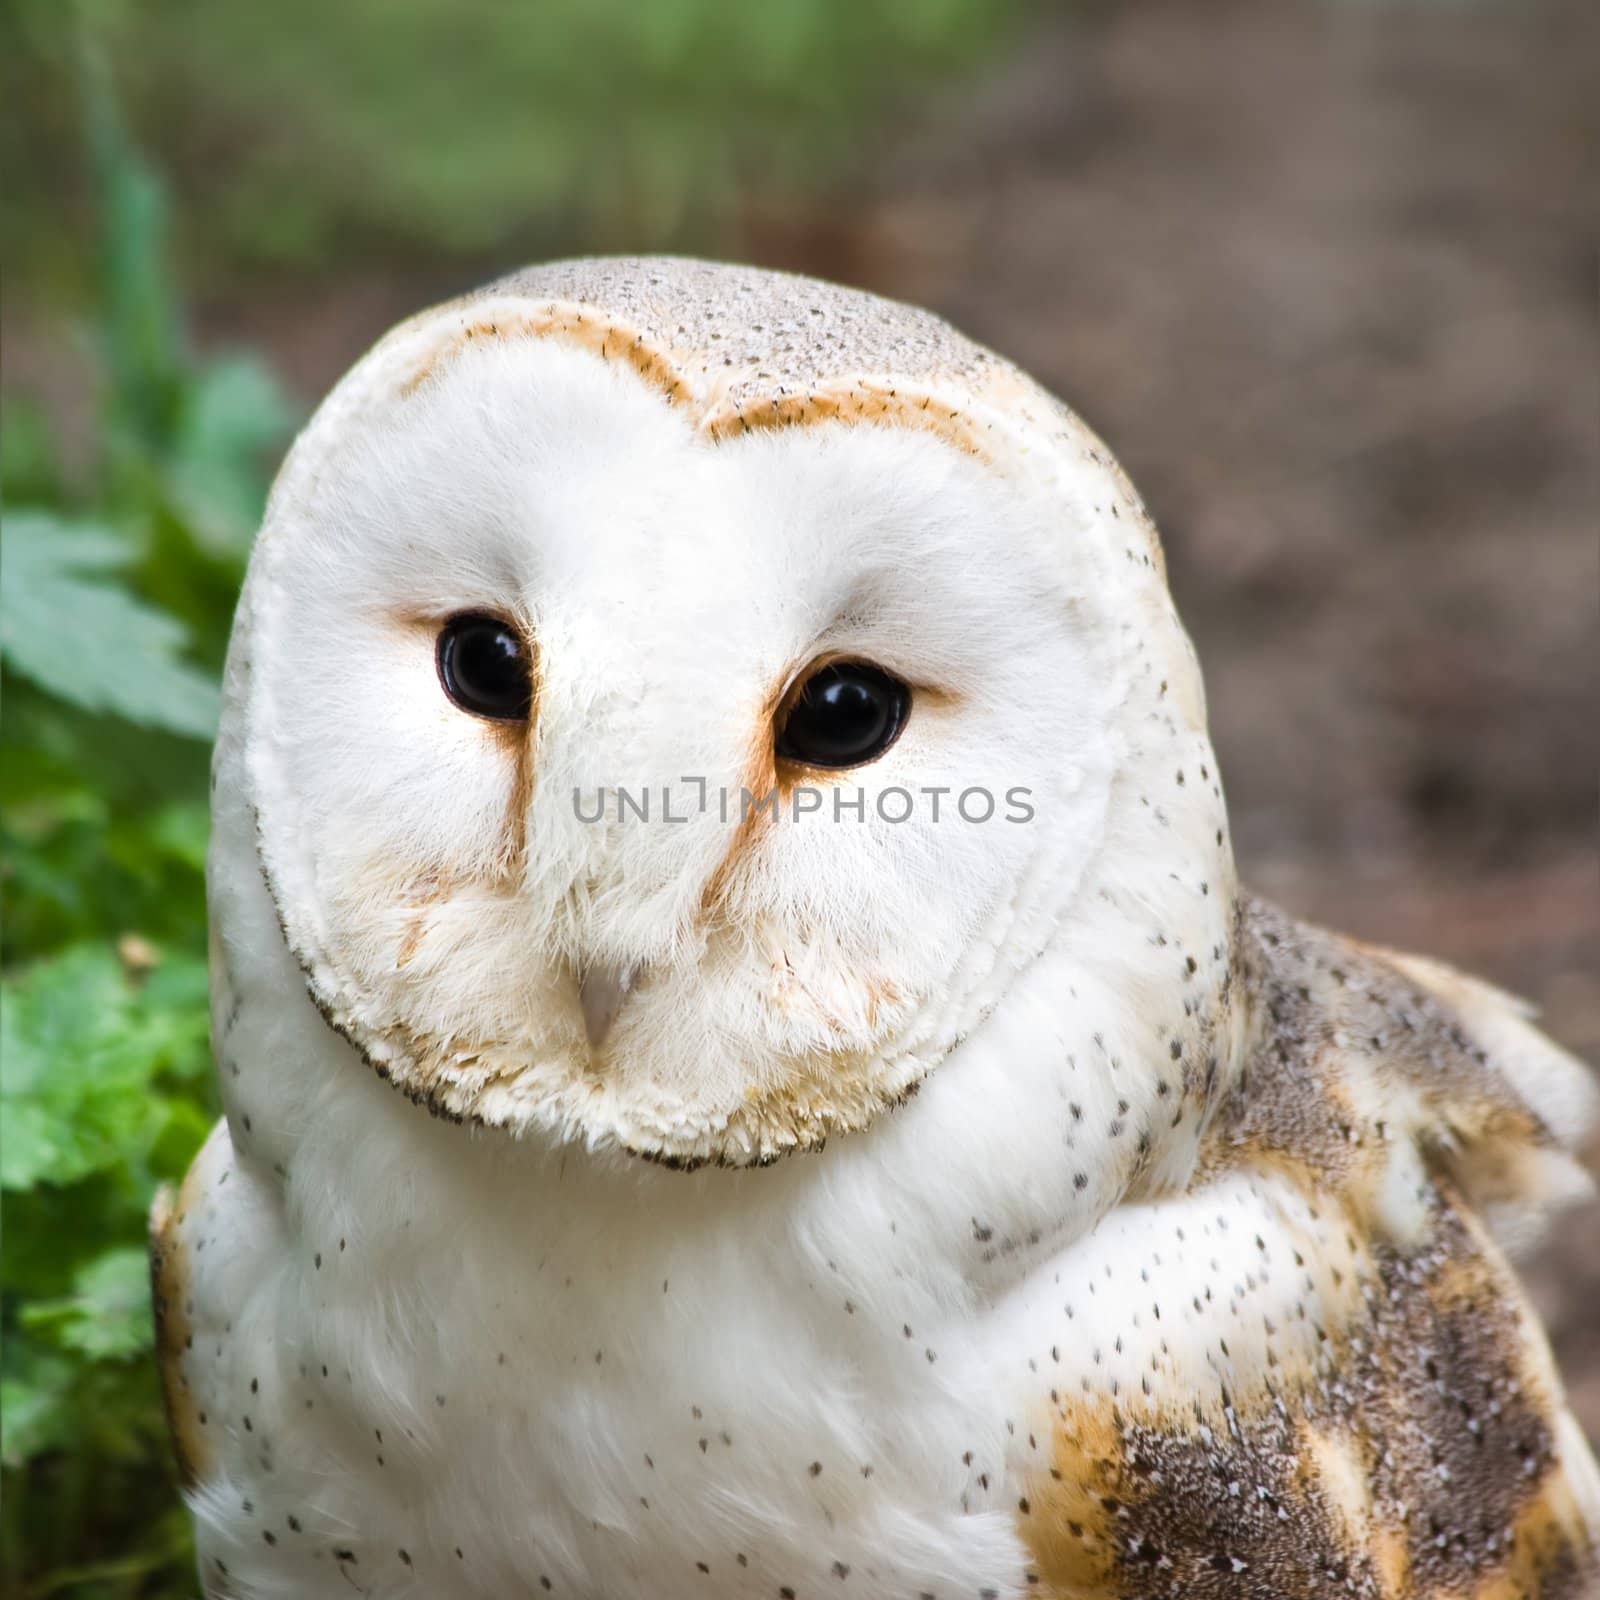 Barn owl or Church owl - square image by Colette